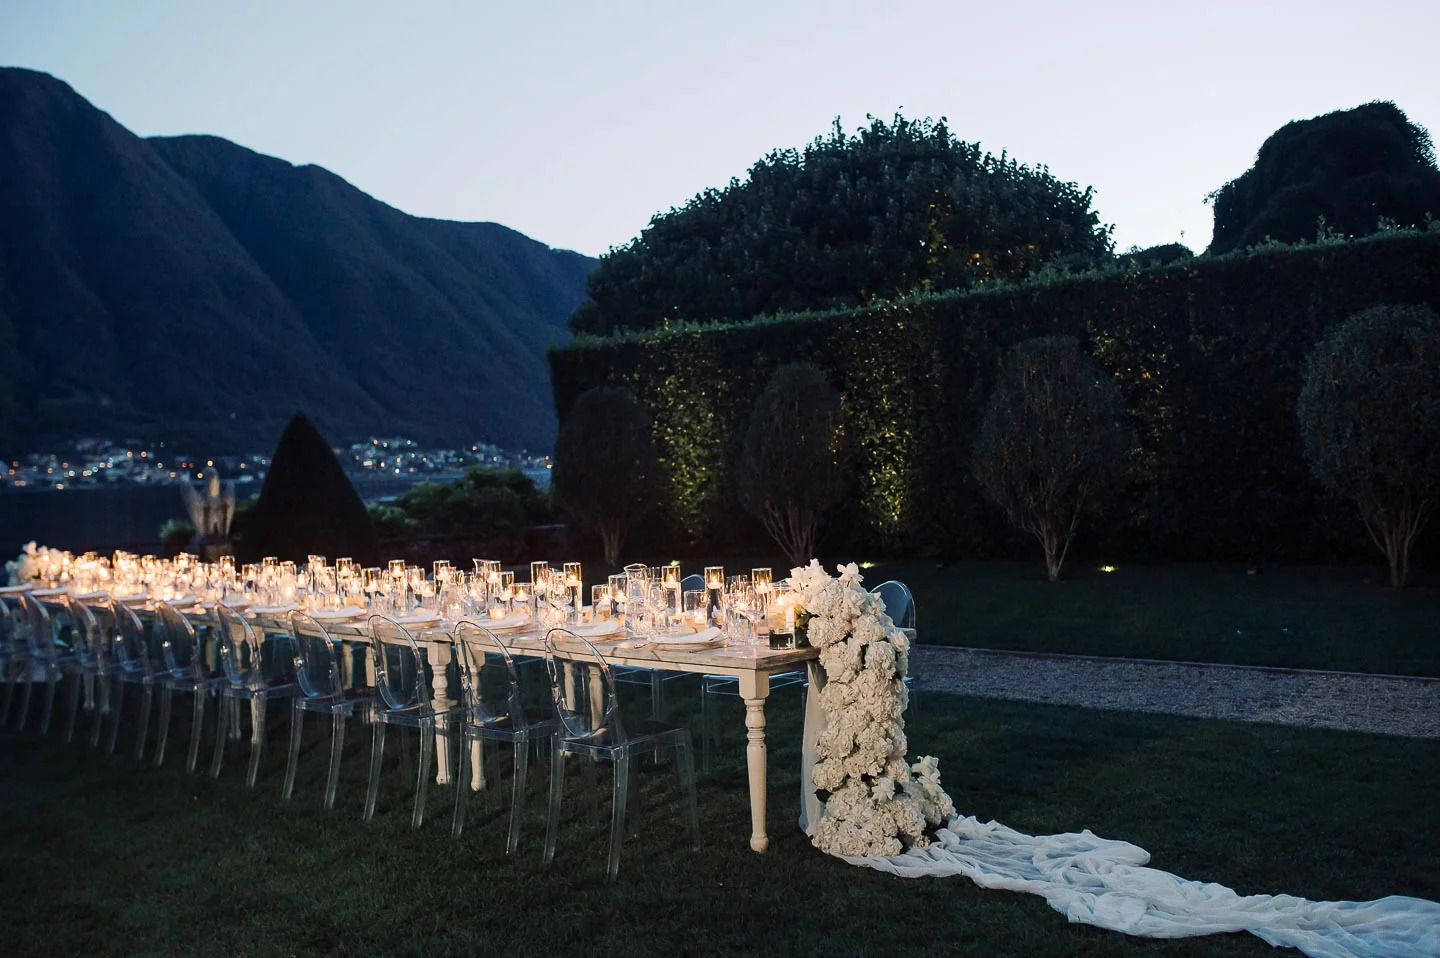 Villa Balbiano is a top spot for any dream wedding